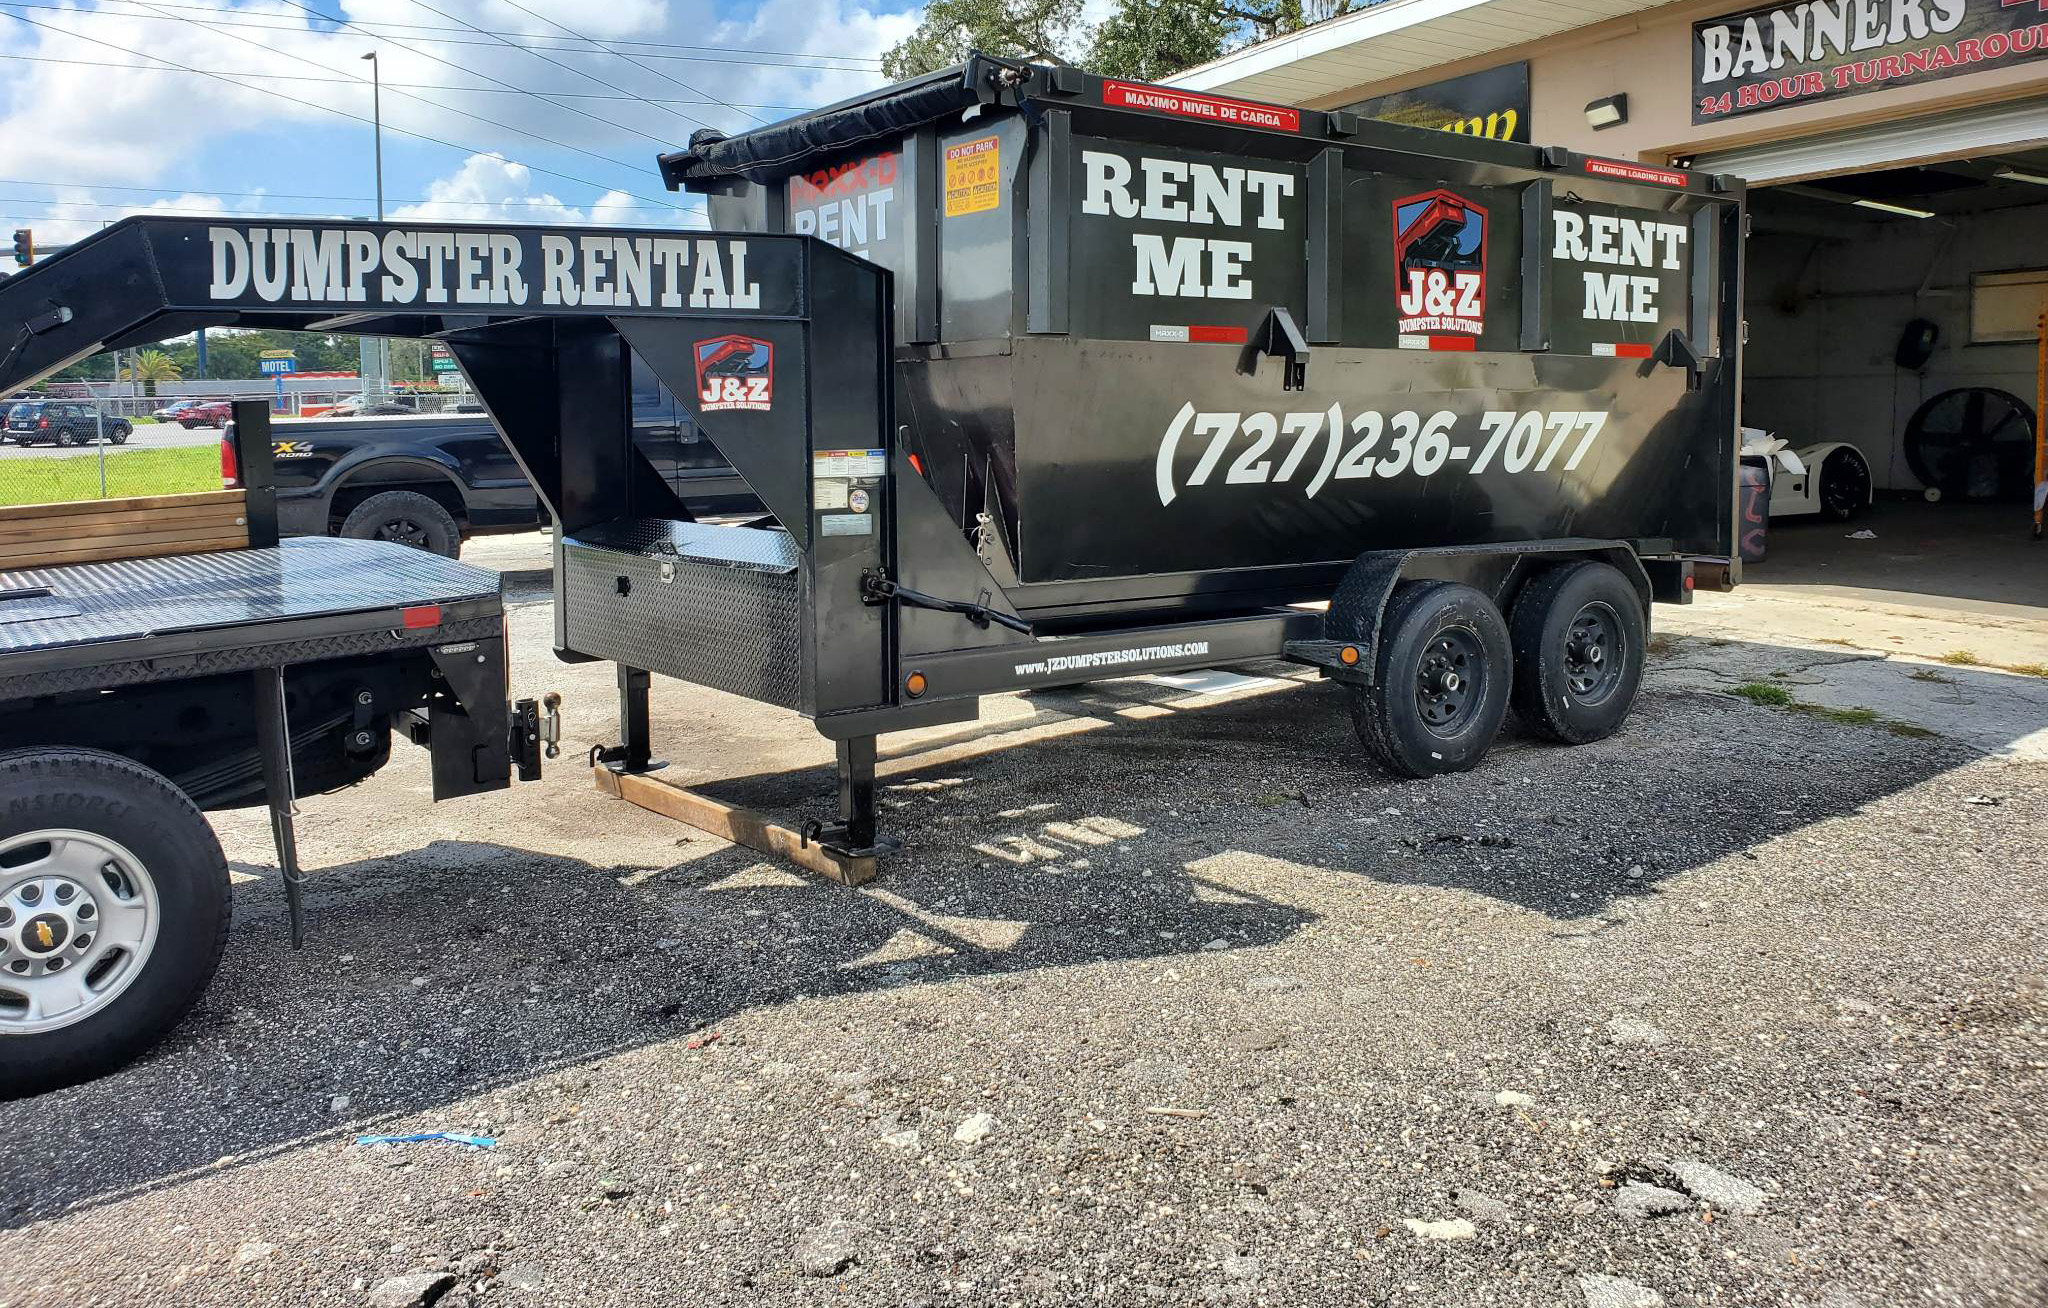 Residential Dumpster Rental Trinity FL Homeowners Use for Renovations and Cleanouts